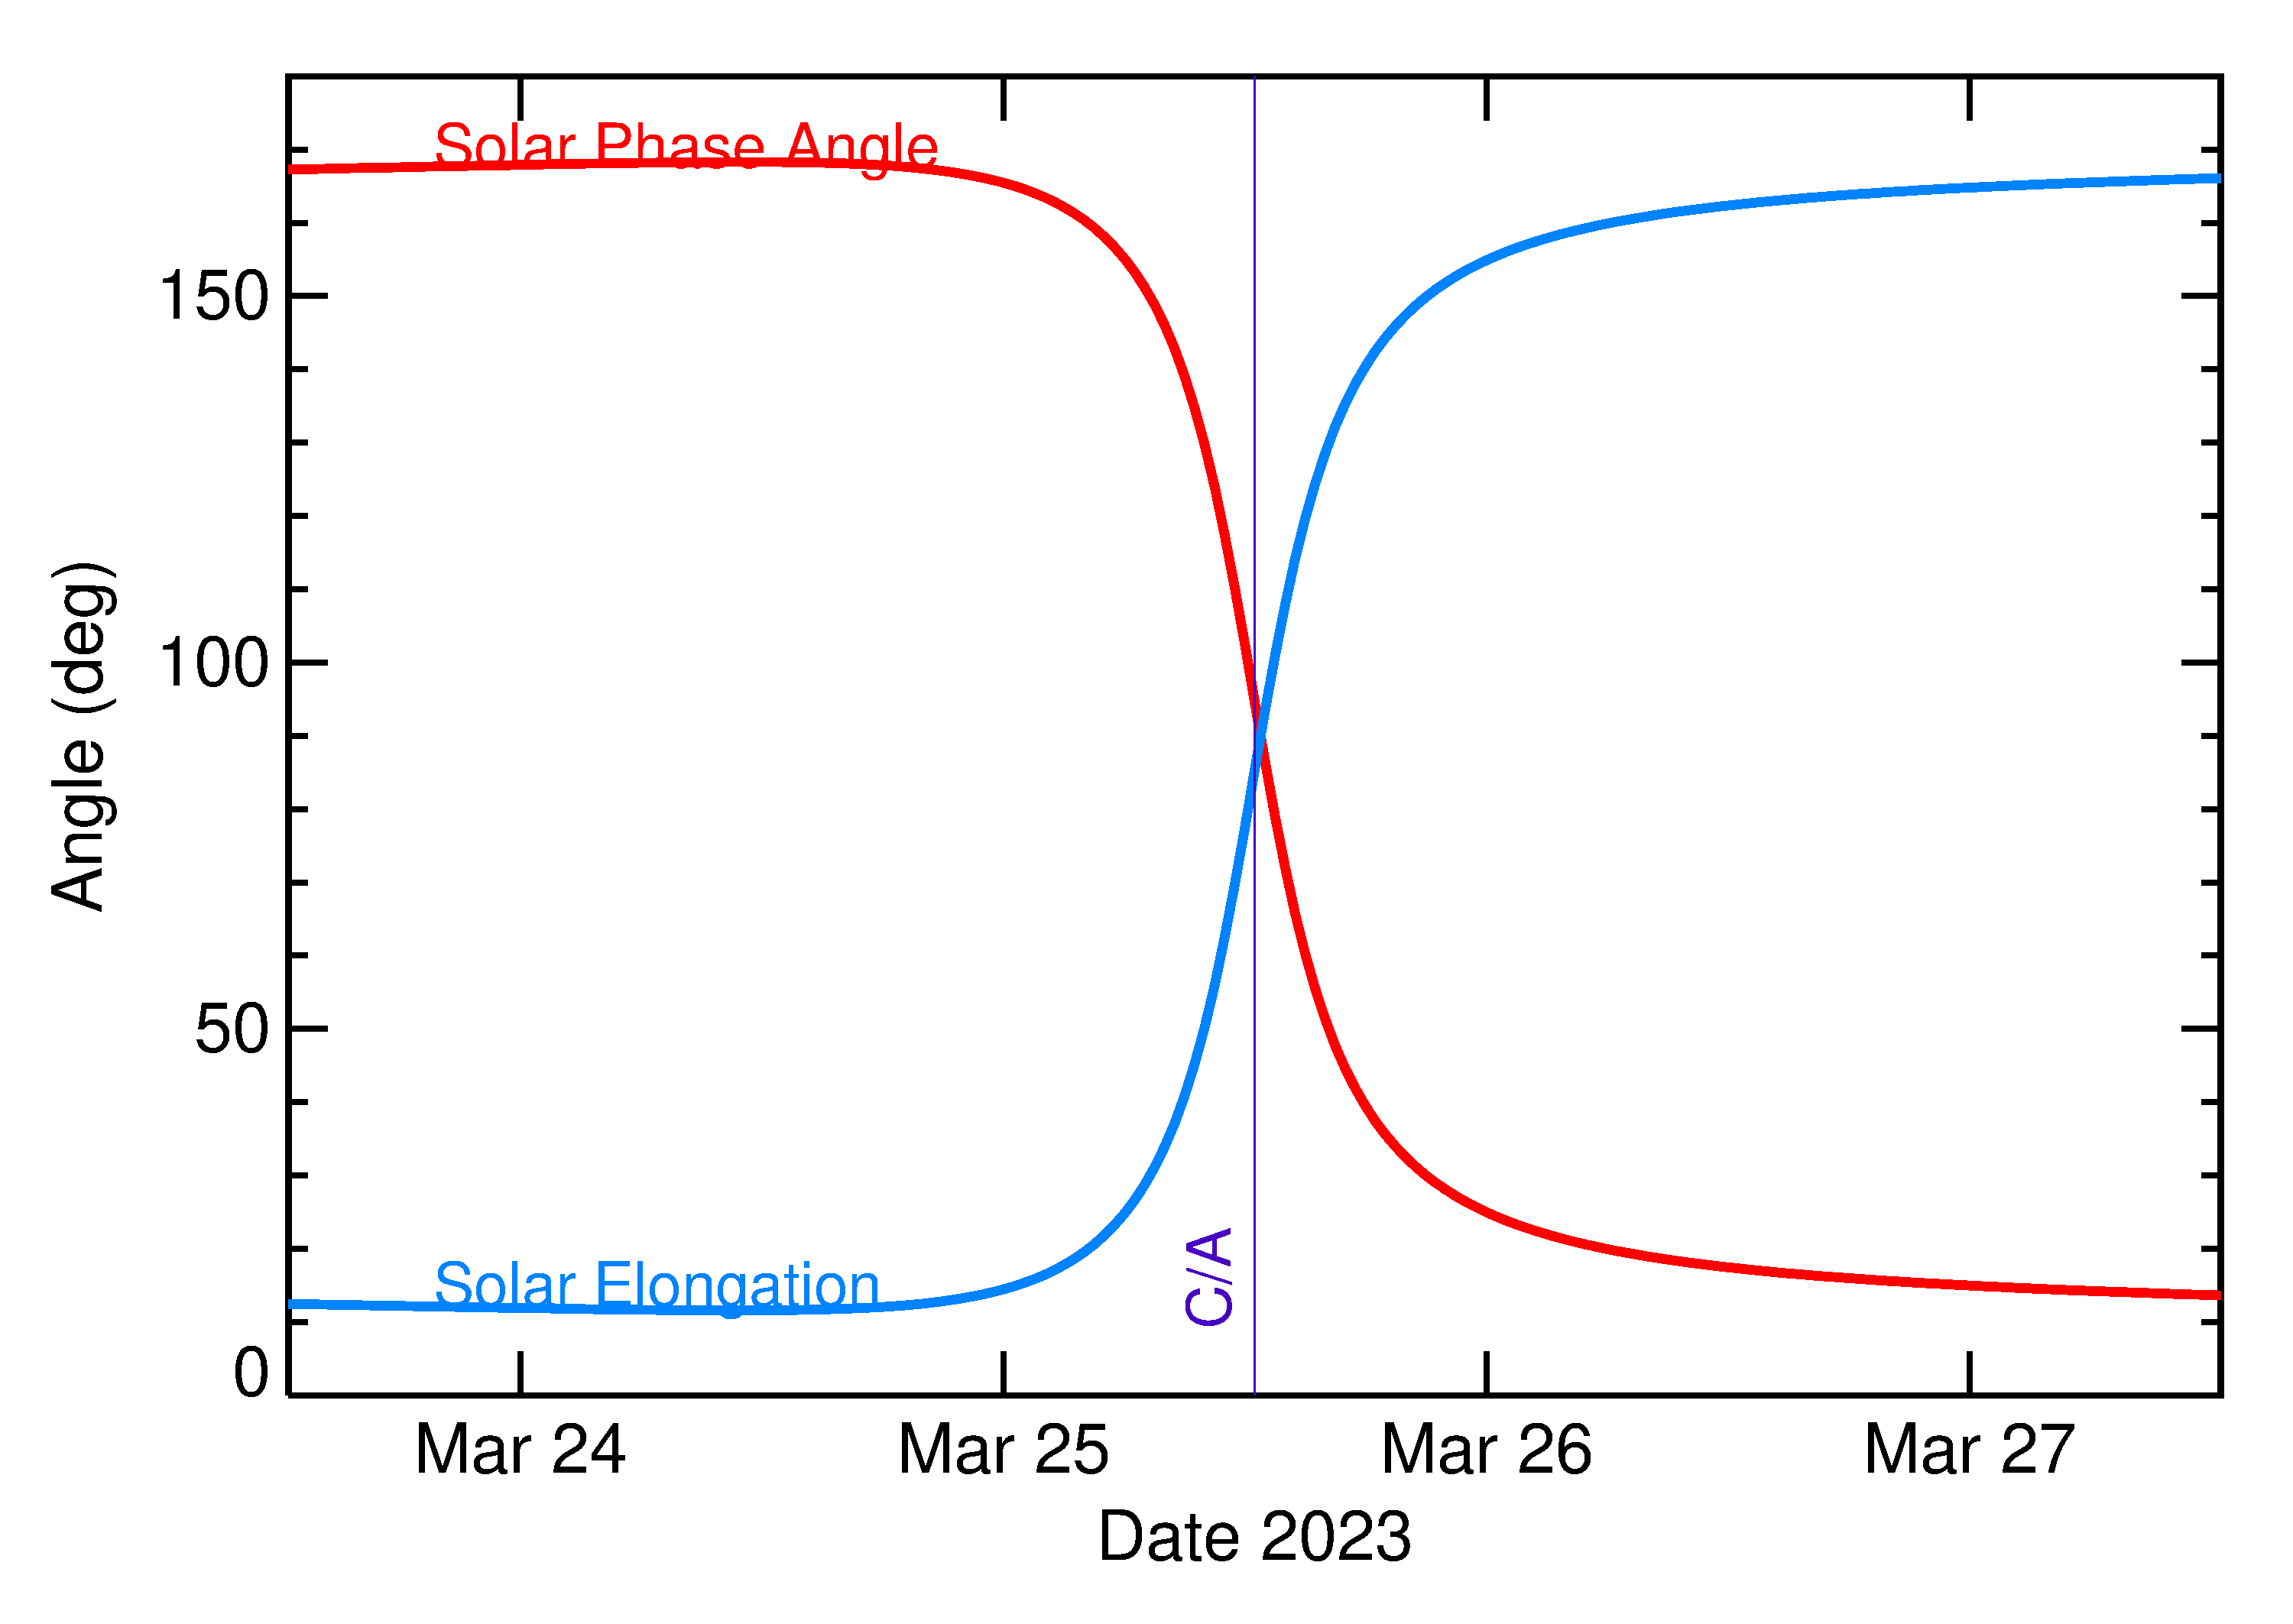 Solar Elongation and Solar Phase Angle of 2023 FN6 in the days around closest approach